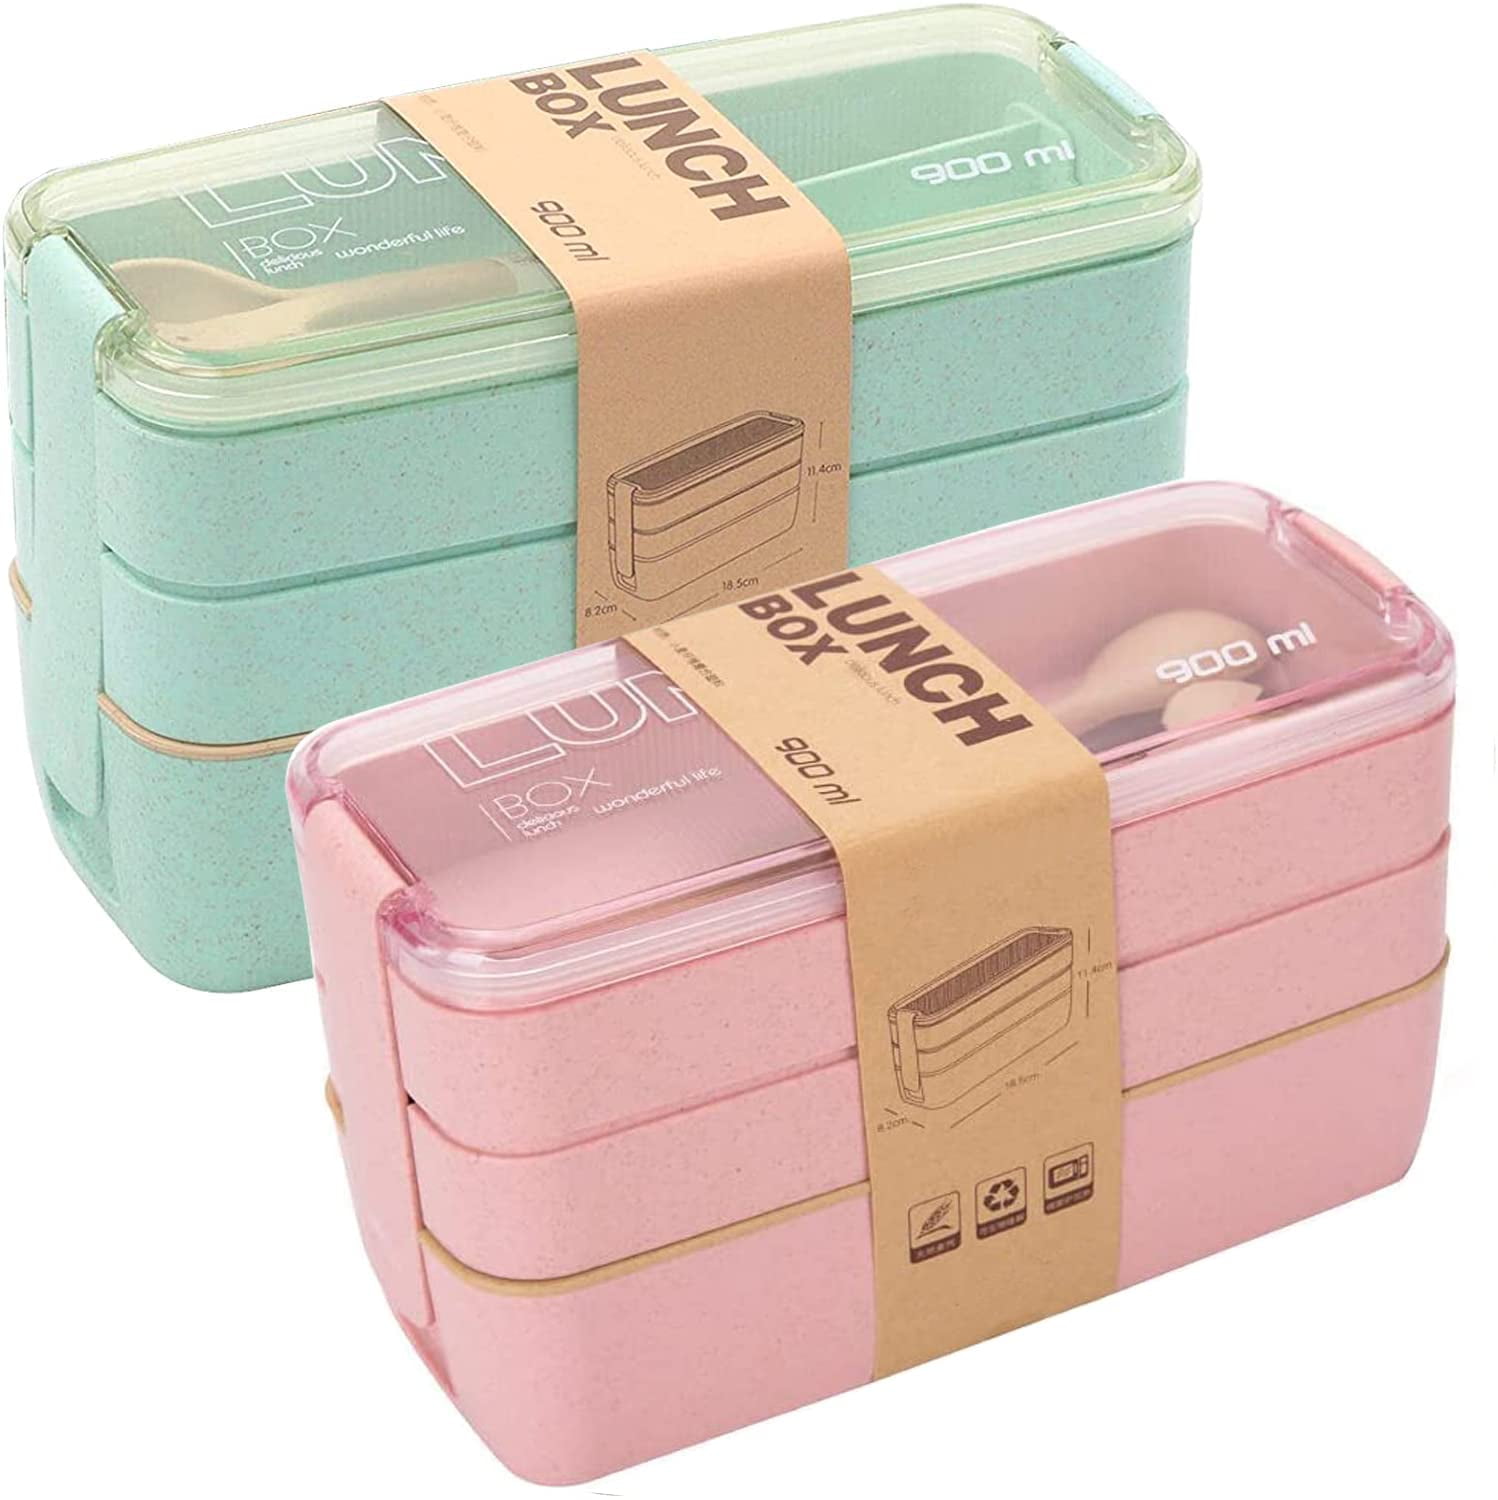 2 Compartment 900ml Meal Prep Food Storage Container, 15 Pack